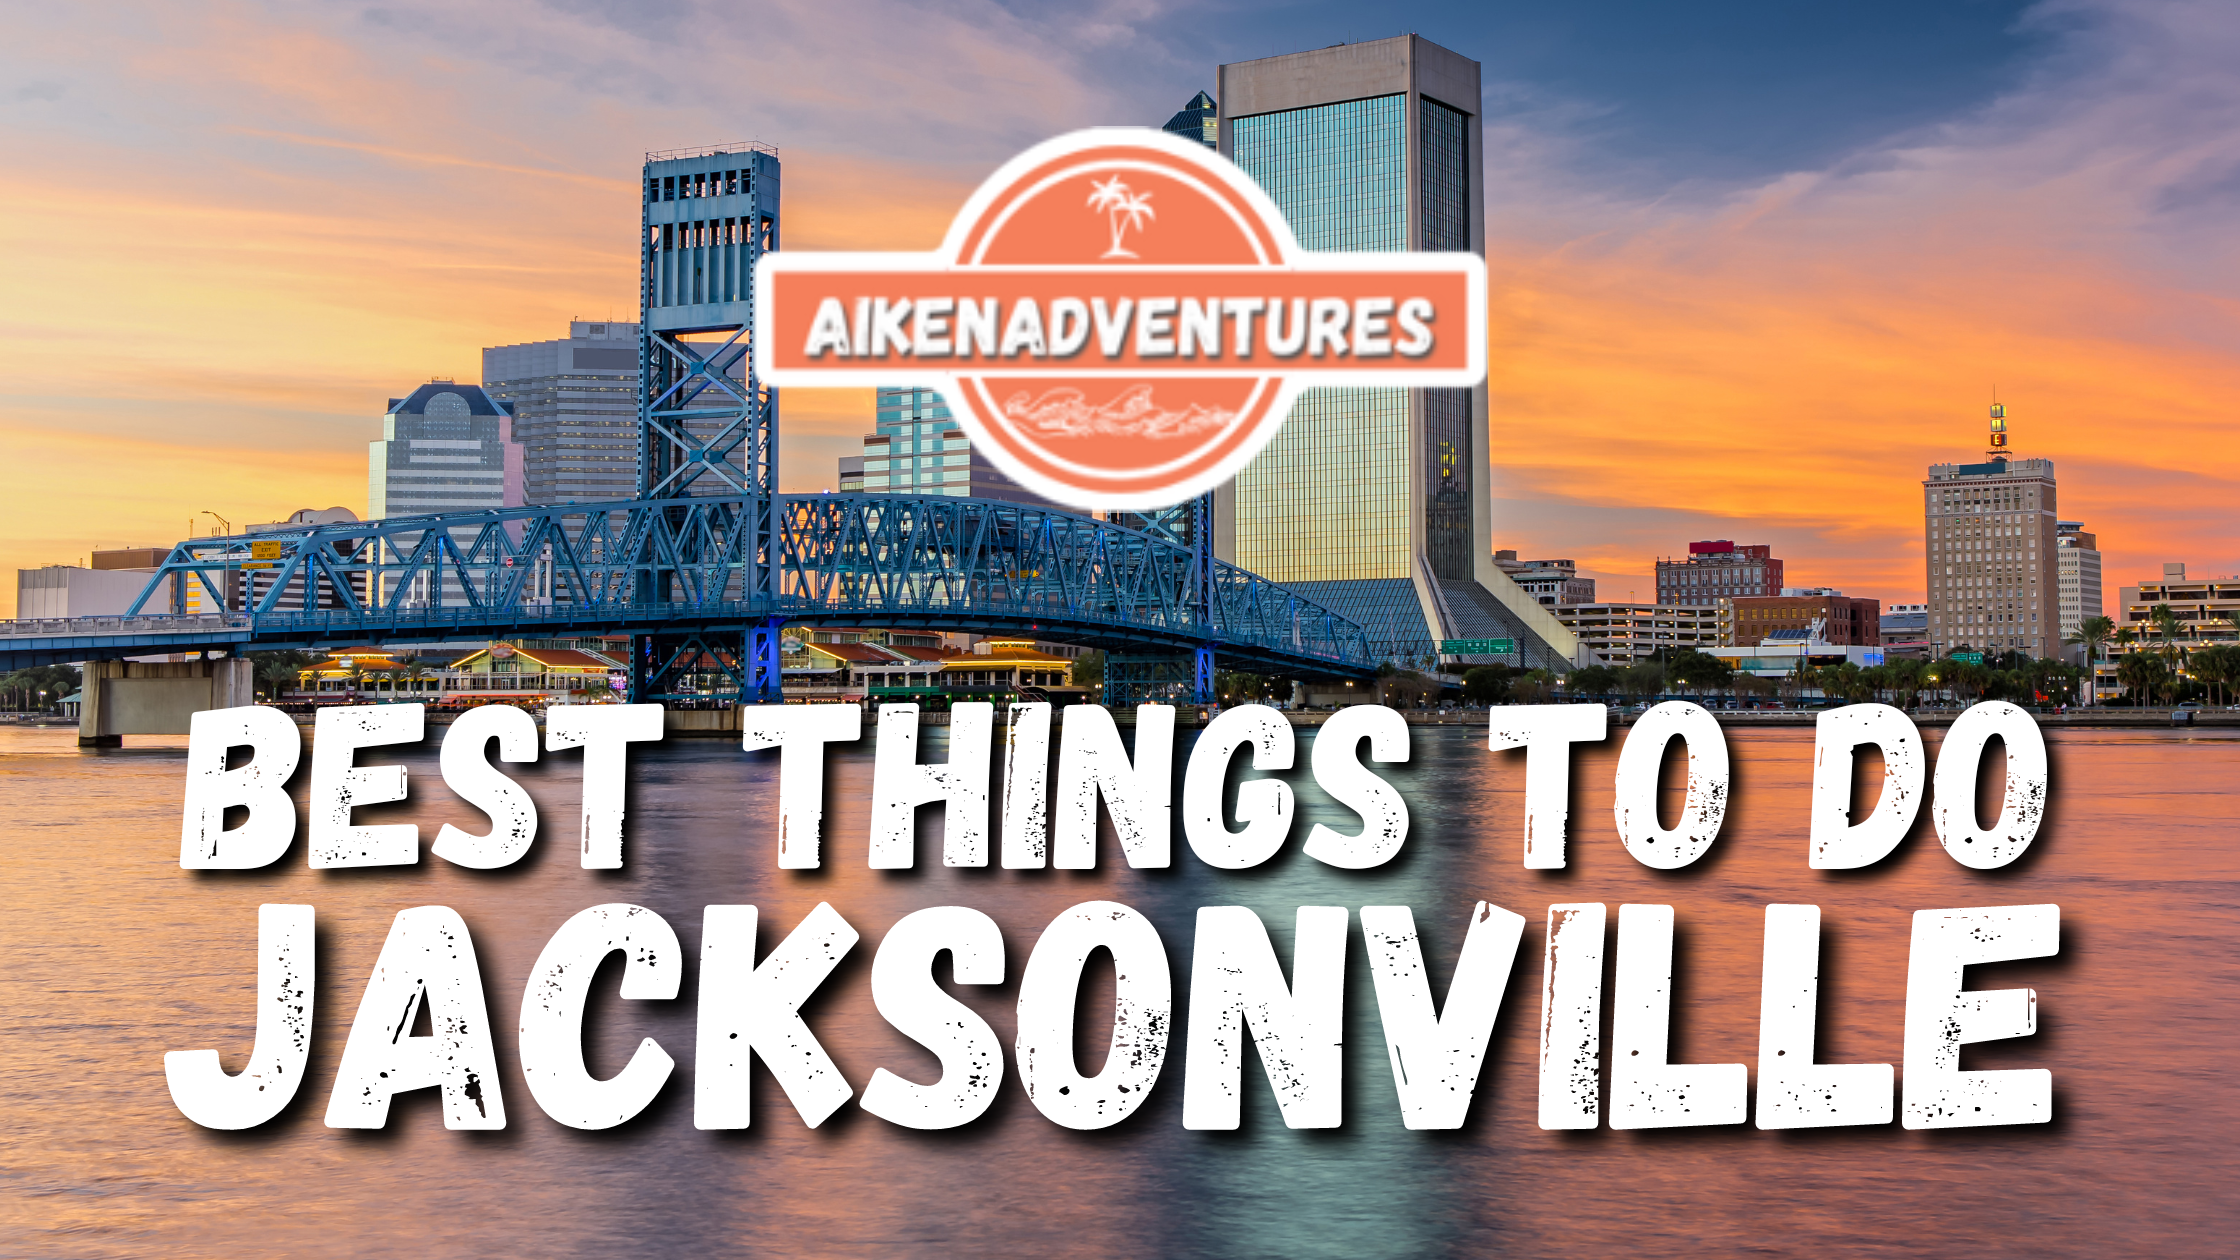 Best things to do in Jacksonville